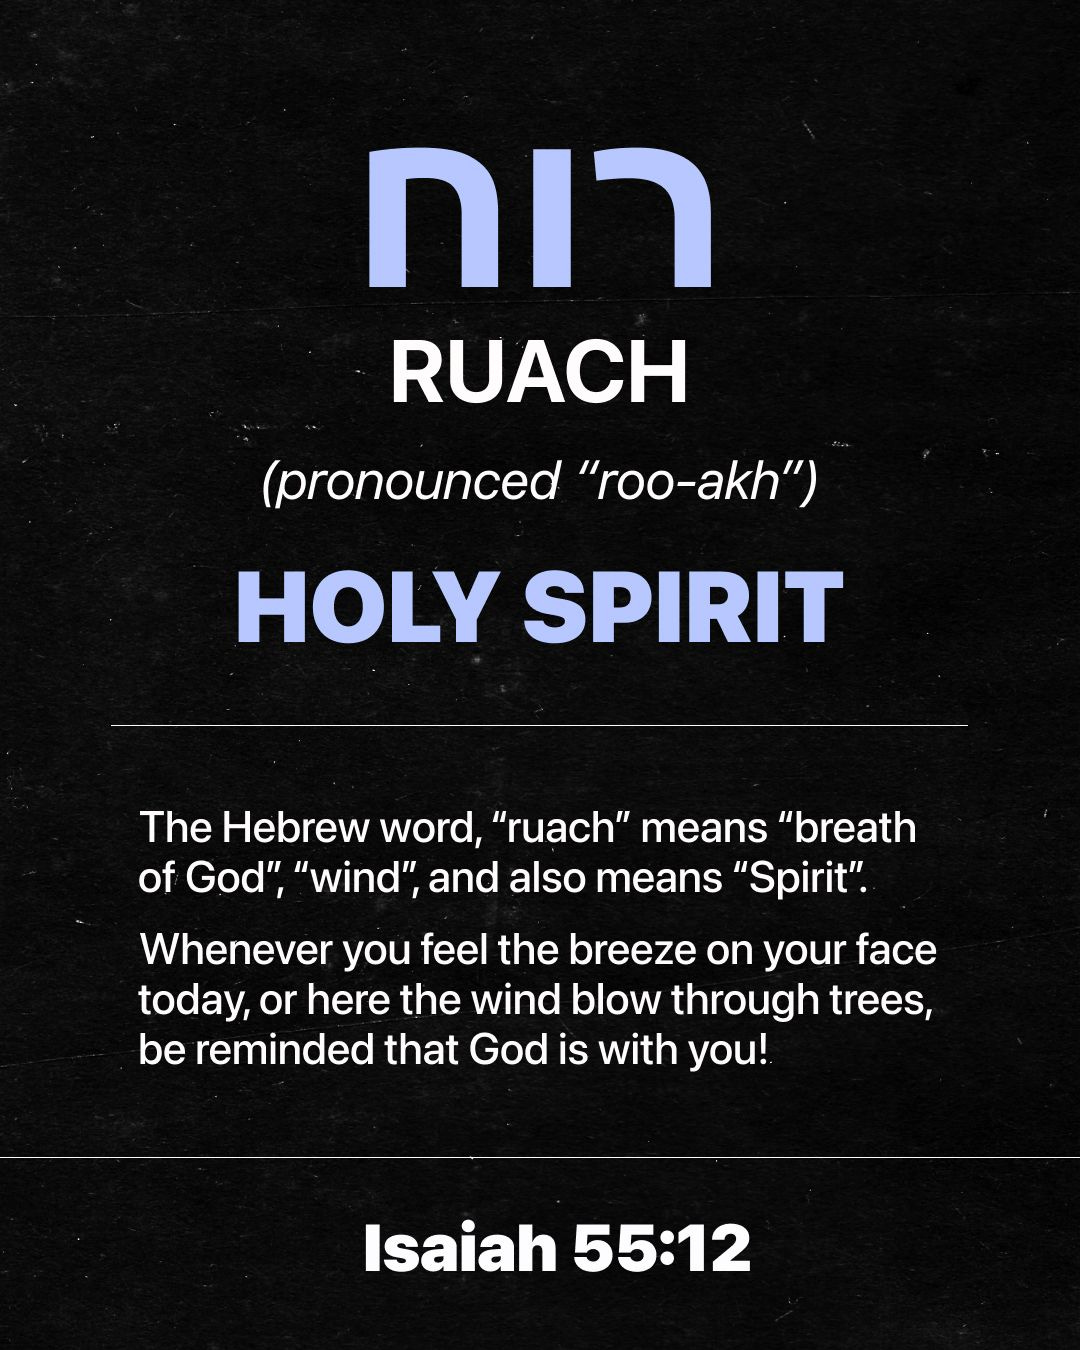 Dave Adamson on X: "You are either led by your circumstances, or led by God's  Spirit Holy Spirit in Hebrew is “ruach”, רוח, pronounced roo'-akh.  #52HebrewWords https://t.co/qWwZSpz7hG" / X